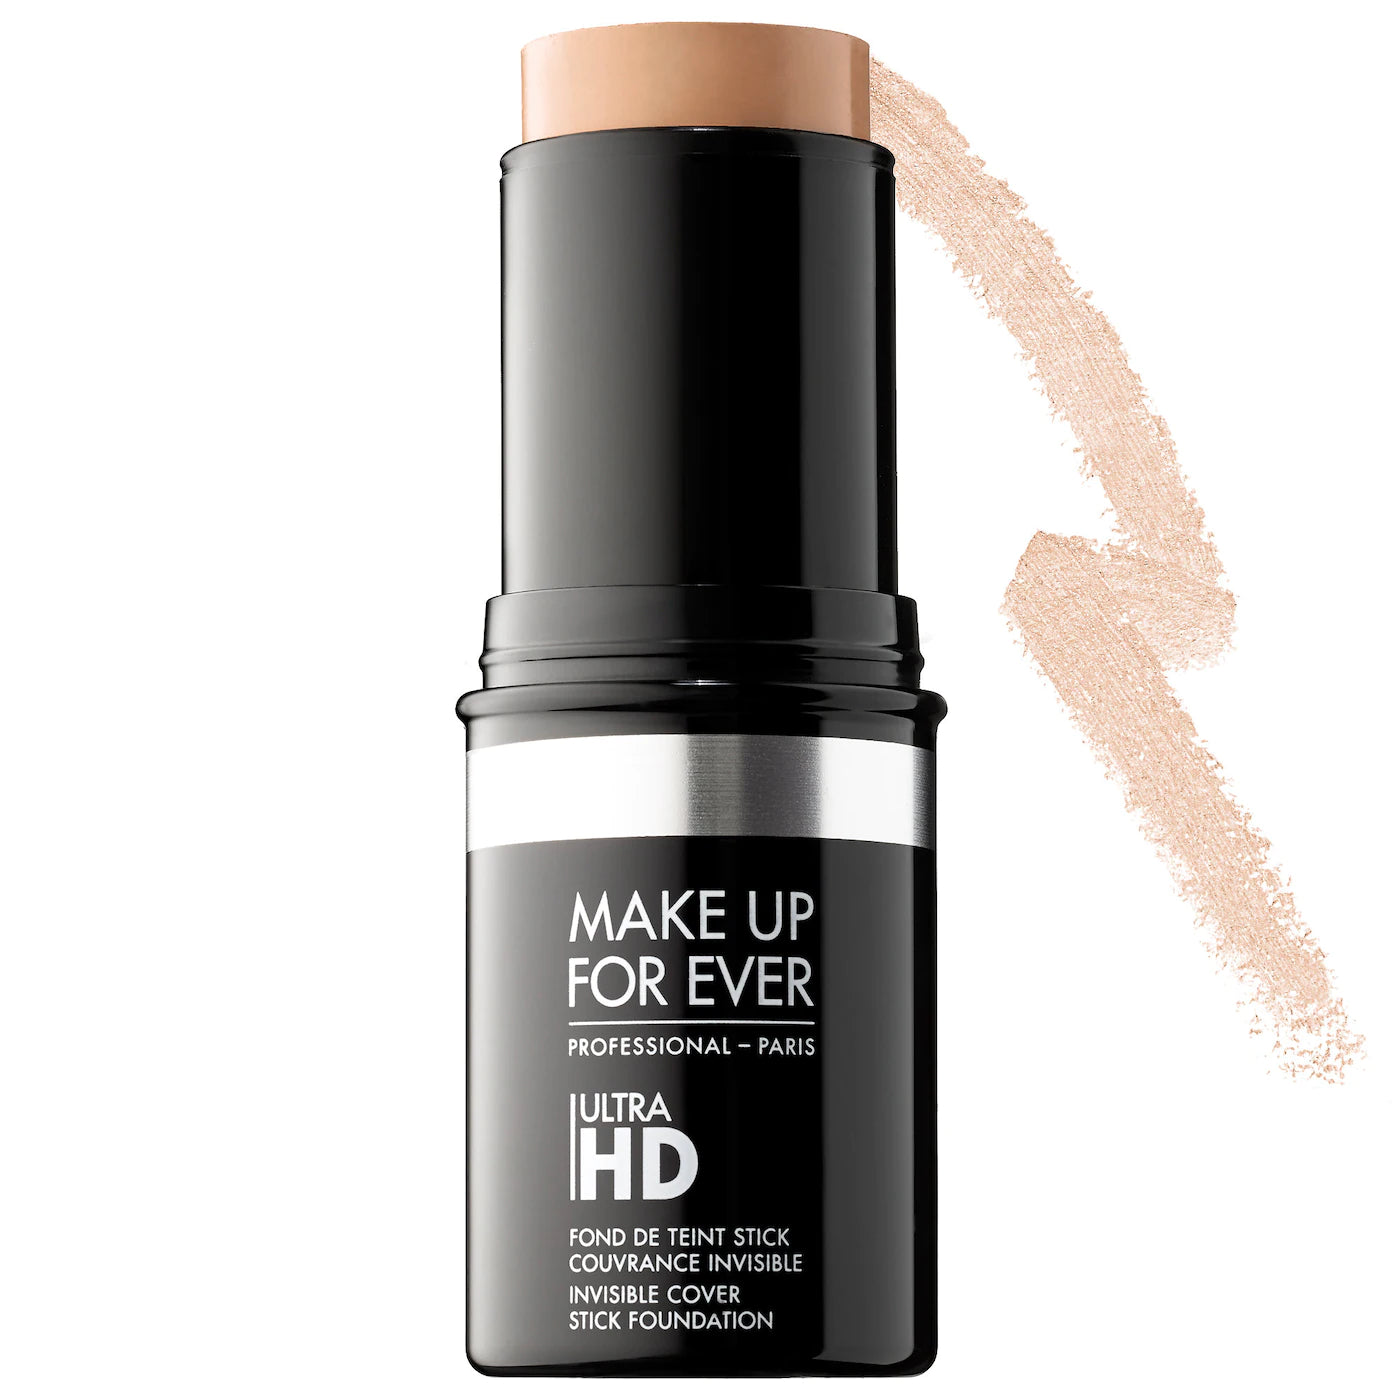 MAKE UP FOR EVER - Ultra HD Invisible Cover Stick Foundation | 12.5 g